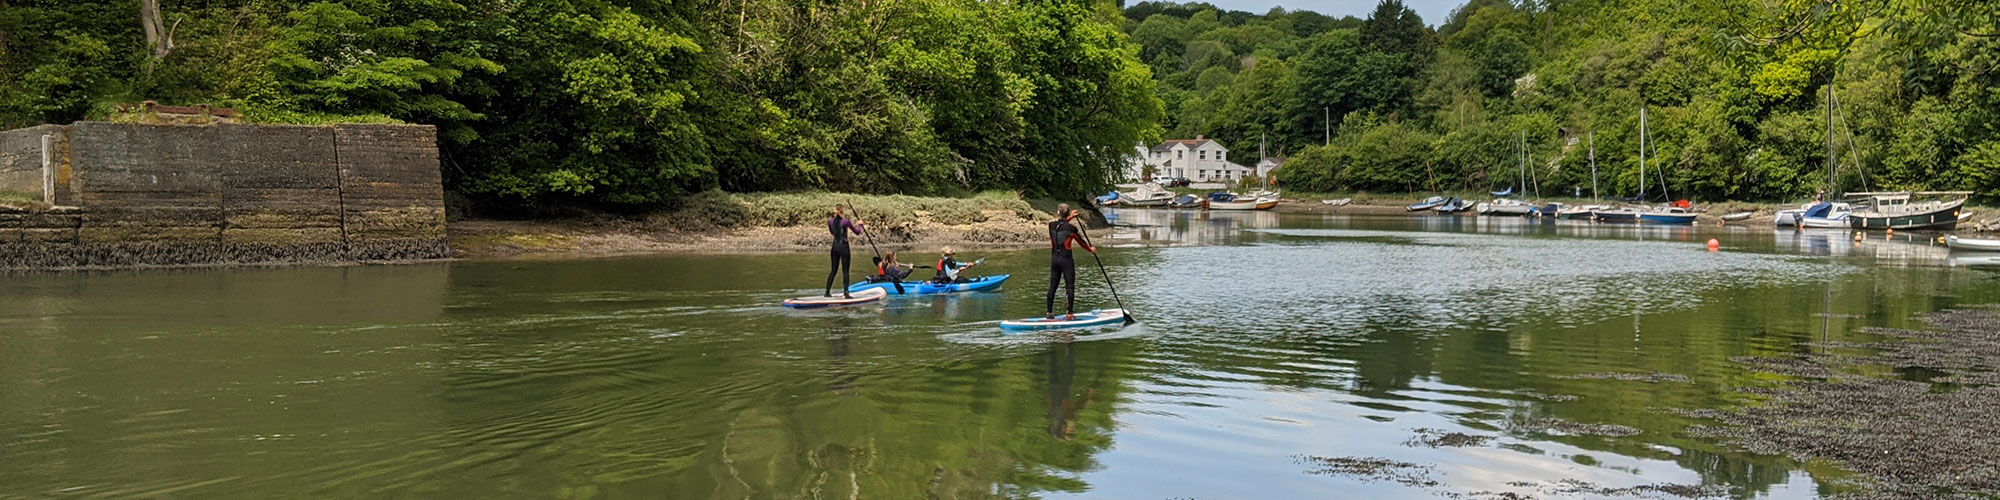 Image of a family paddleboarding on the Lynher river